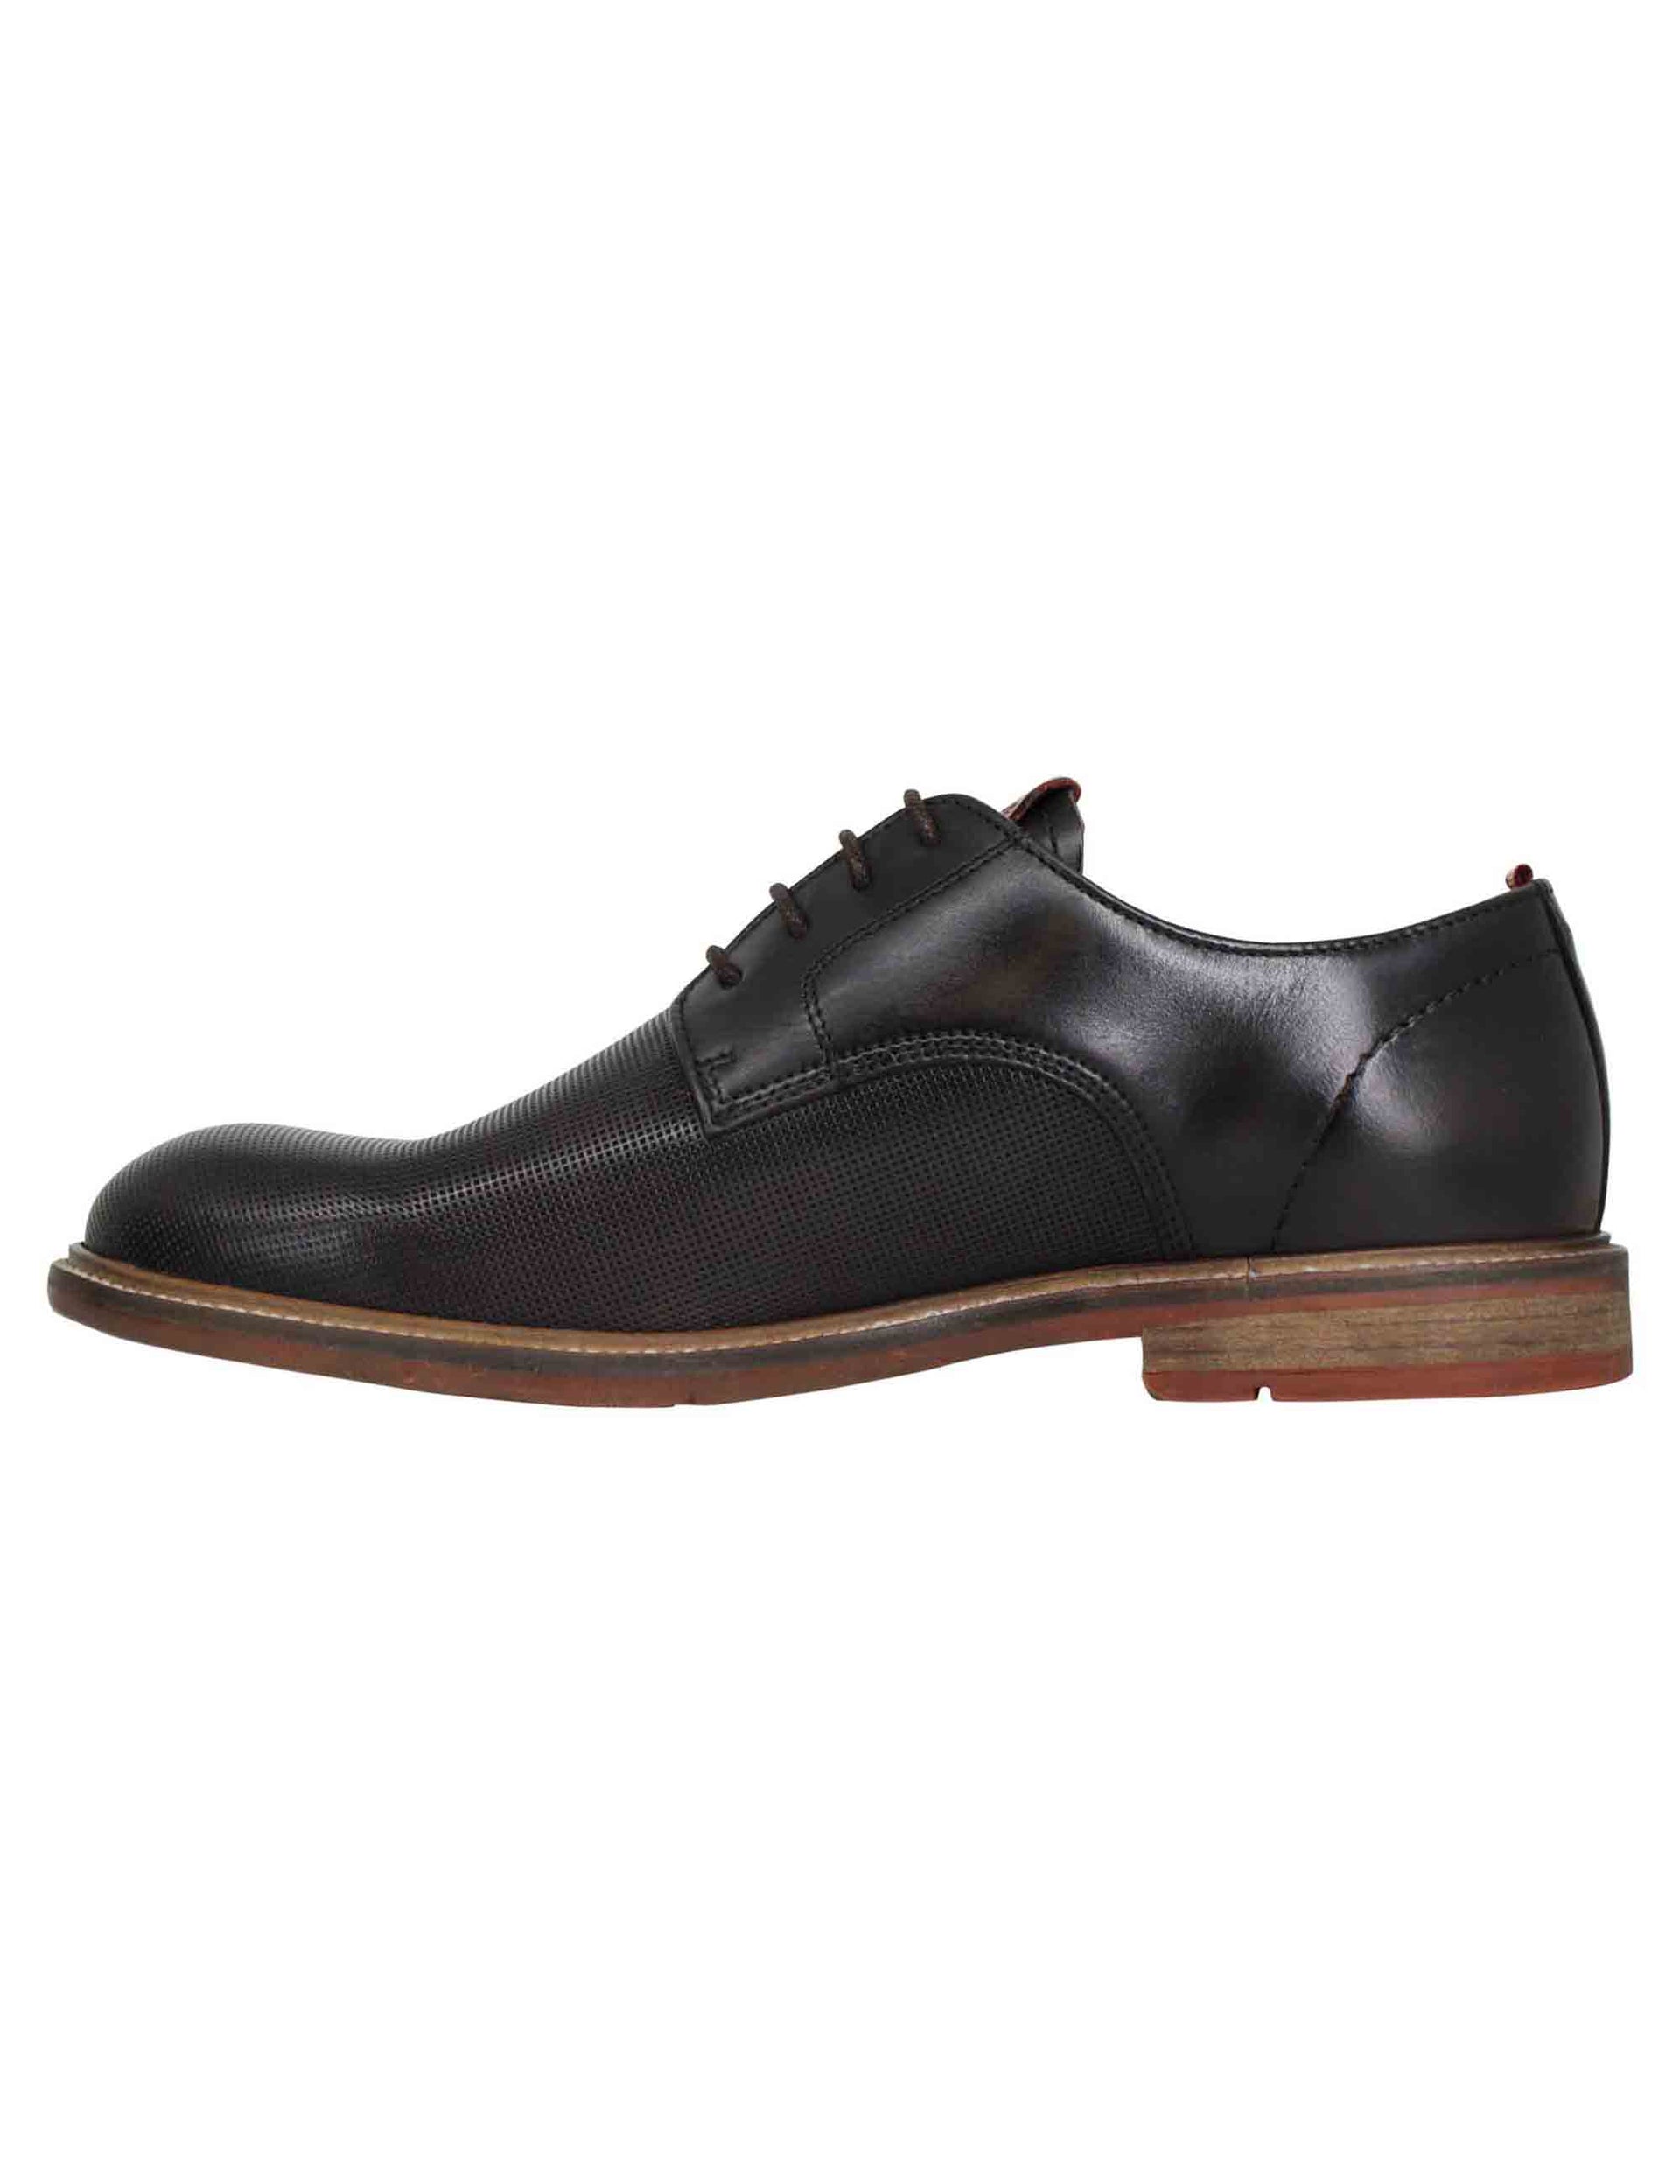 Caye men's lace-ups in brown leather with rubber sole